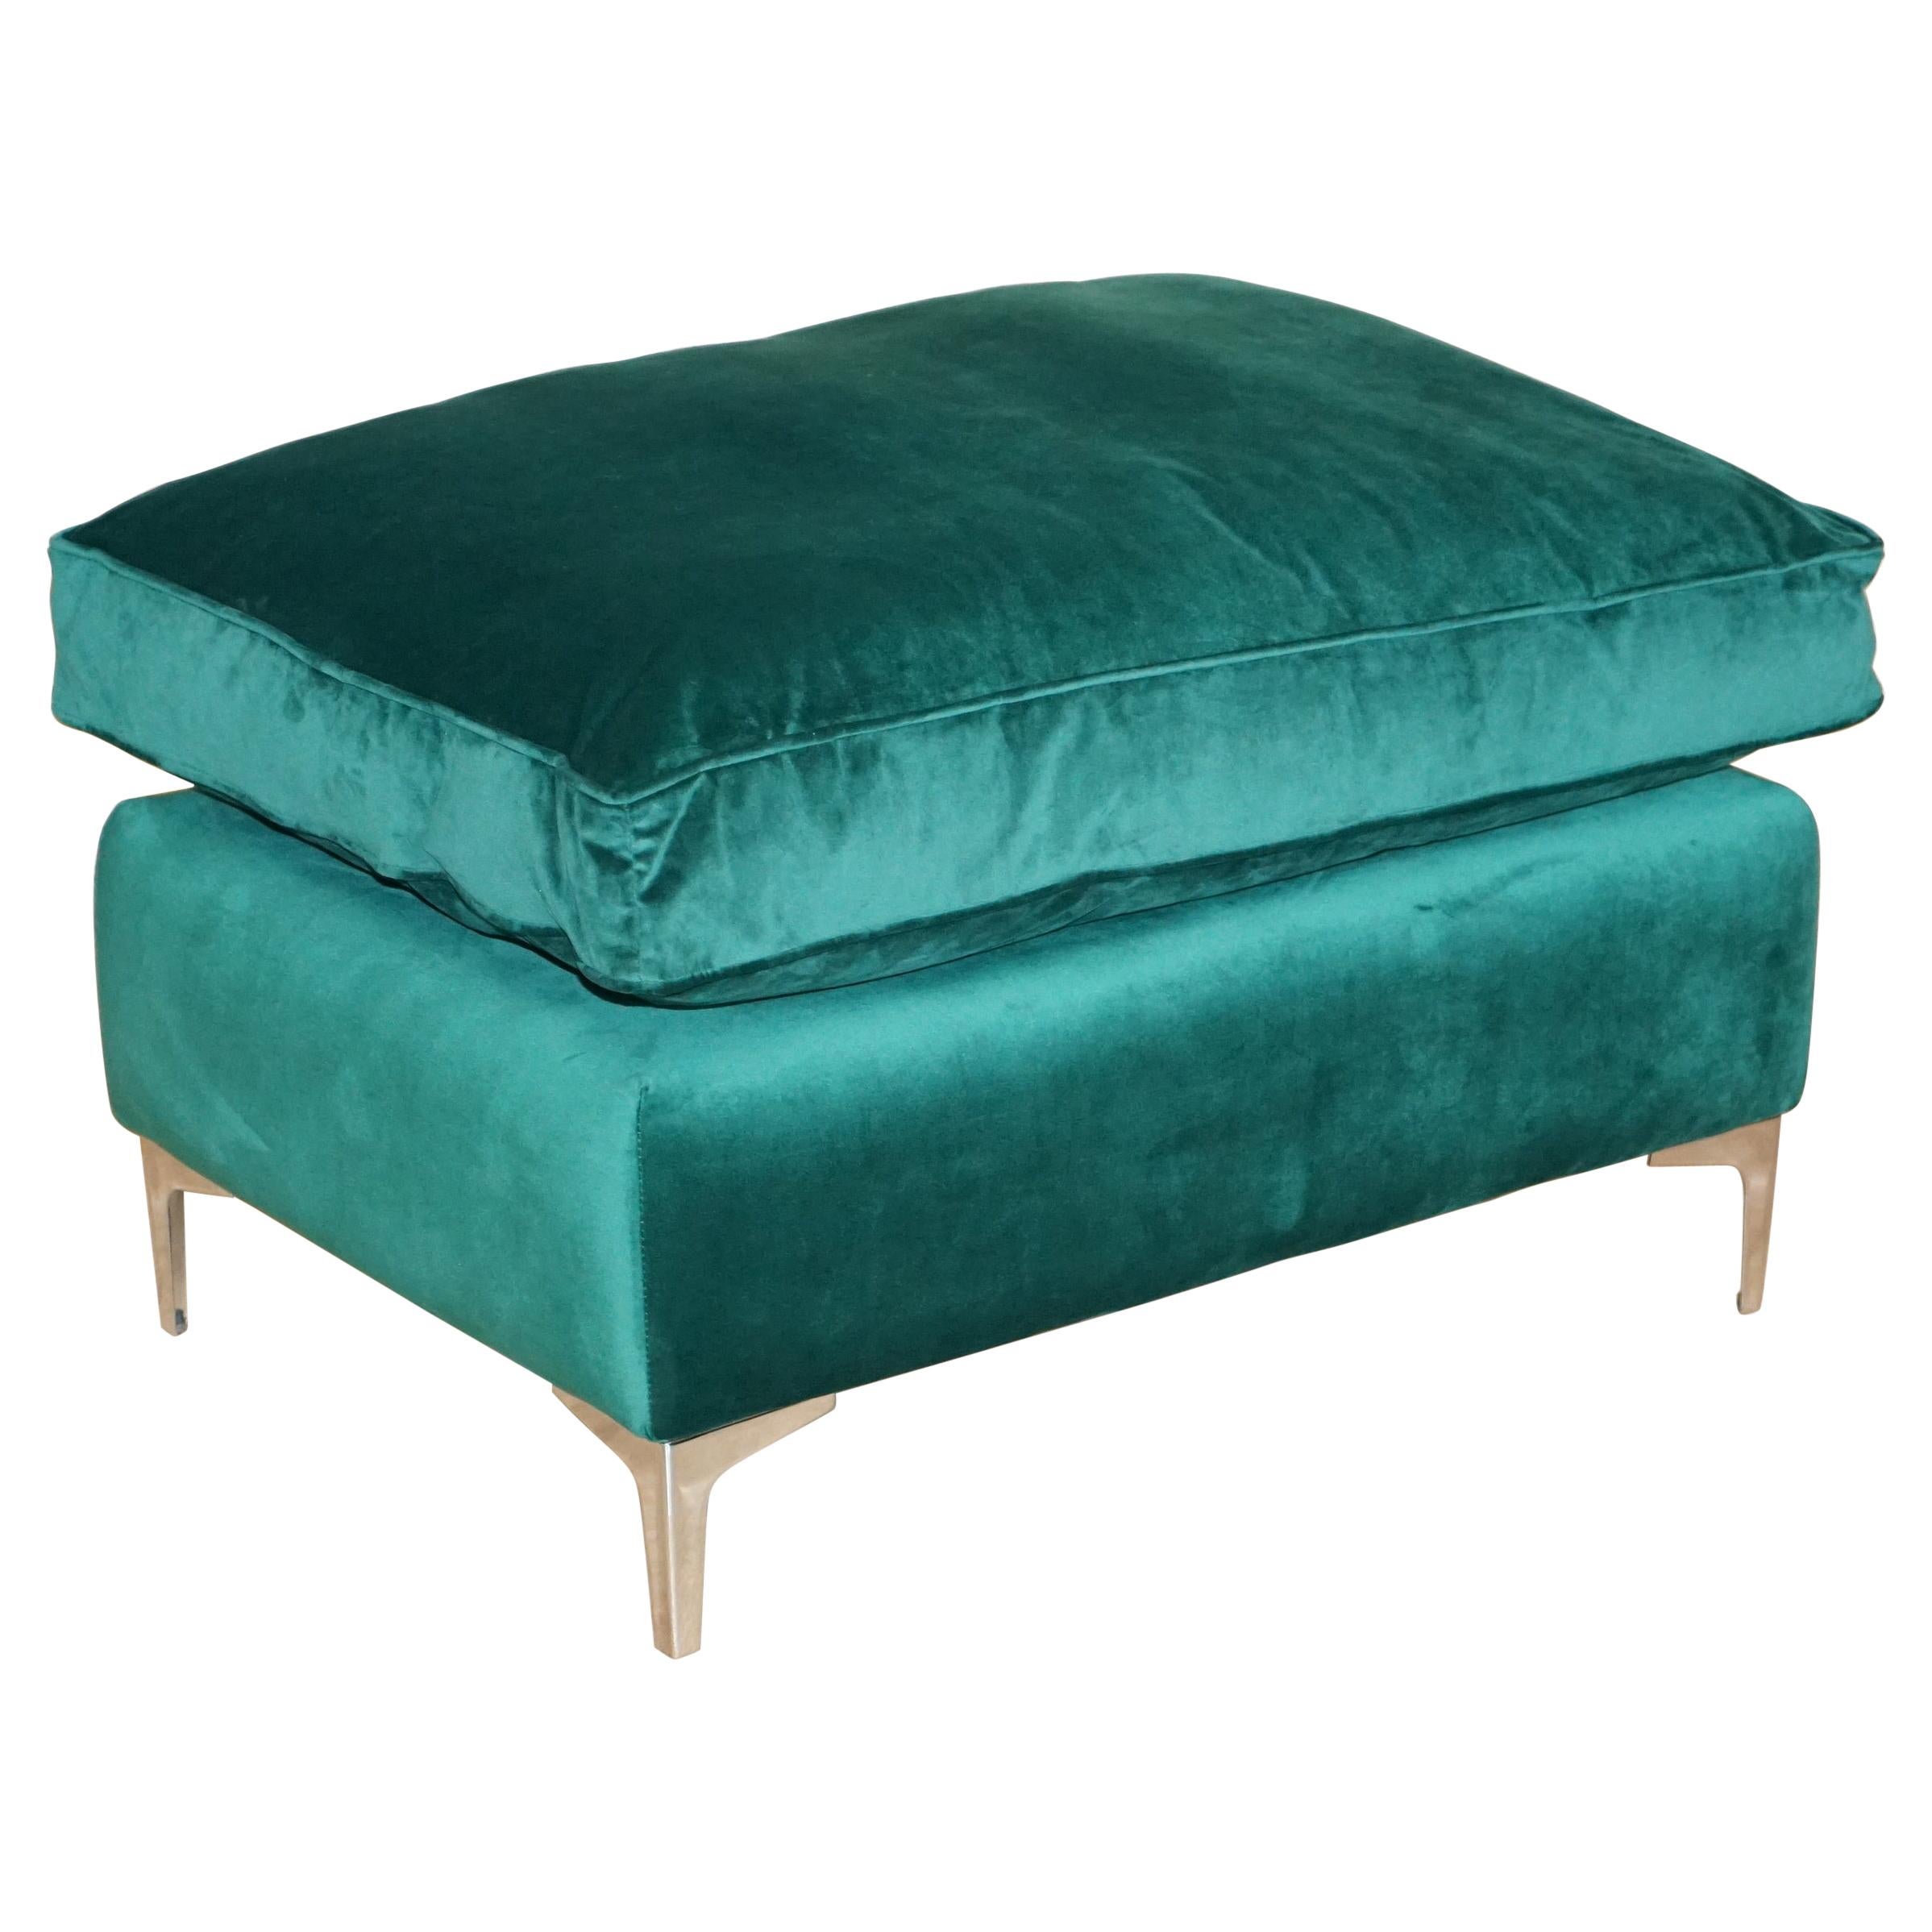 Stunning Ex Display Emerald Green Velvet Large Ottoman Footstool or Bench Seat For Sale